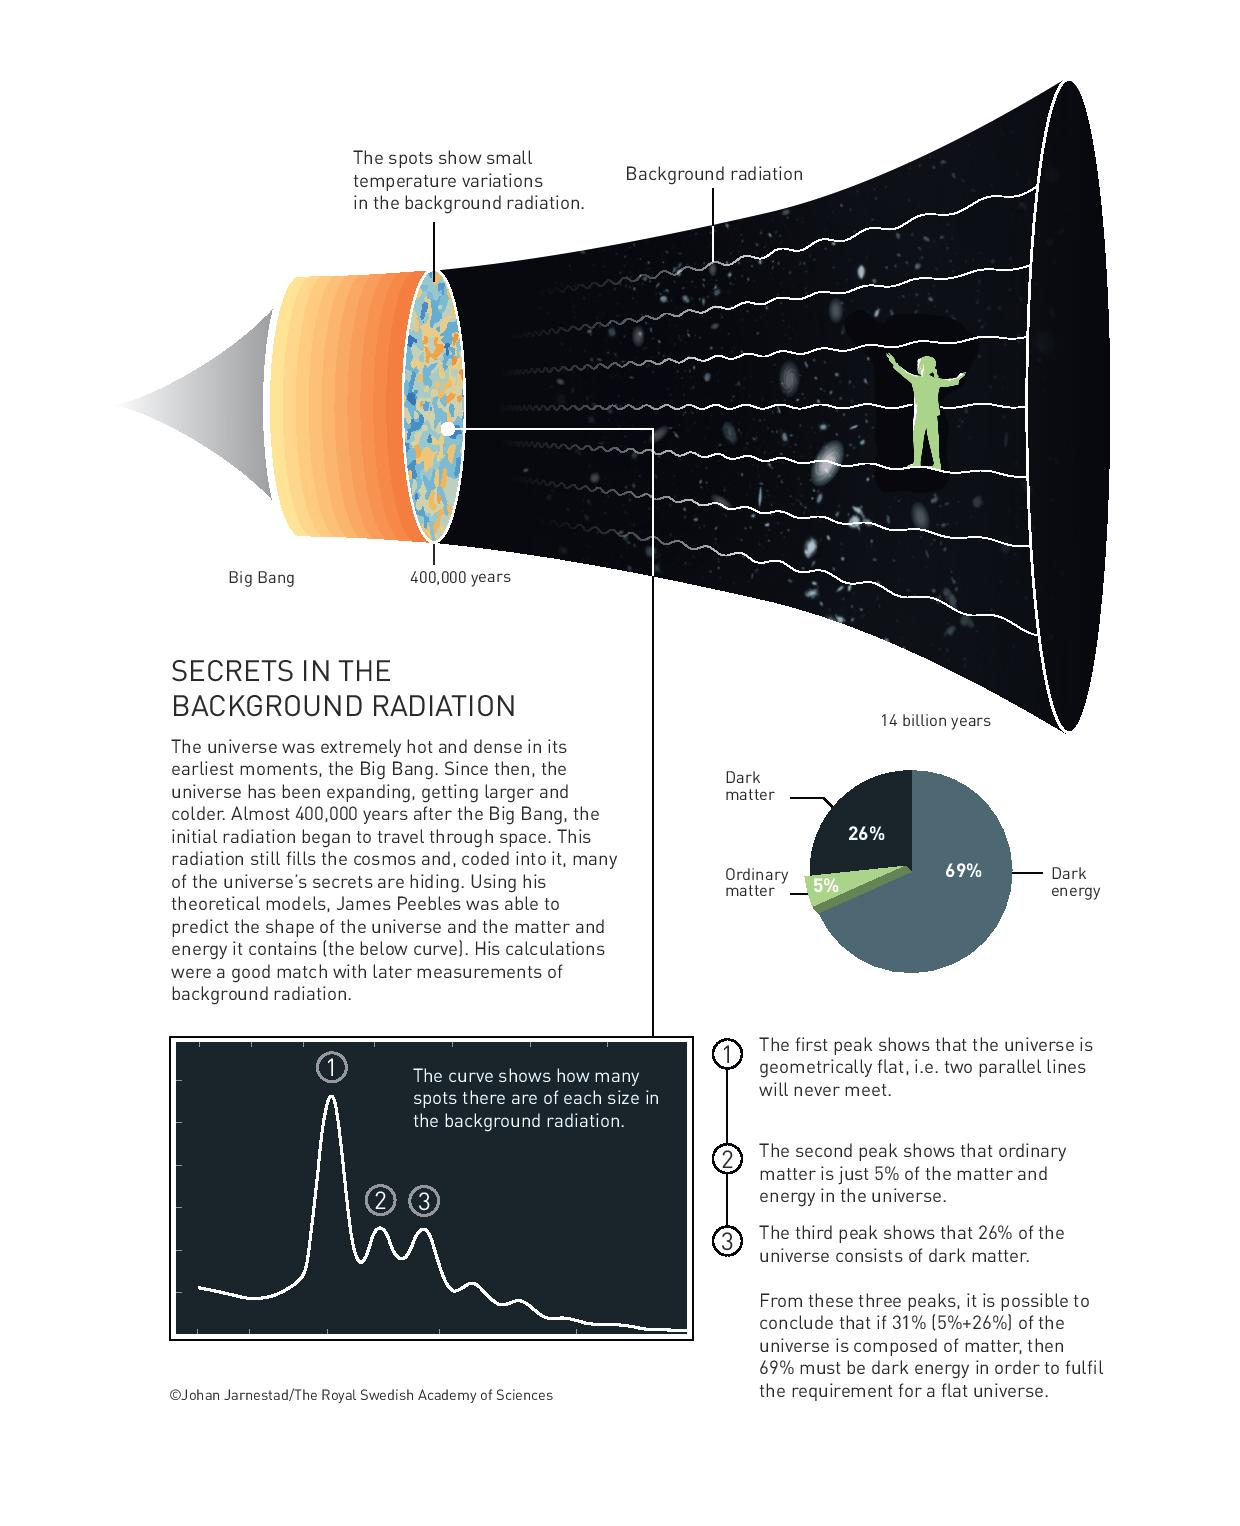 bacground radiation and anisotropies that indicate the structure of the universe